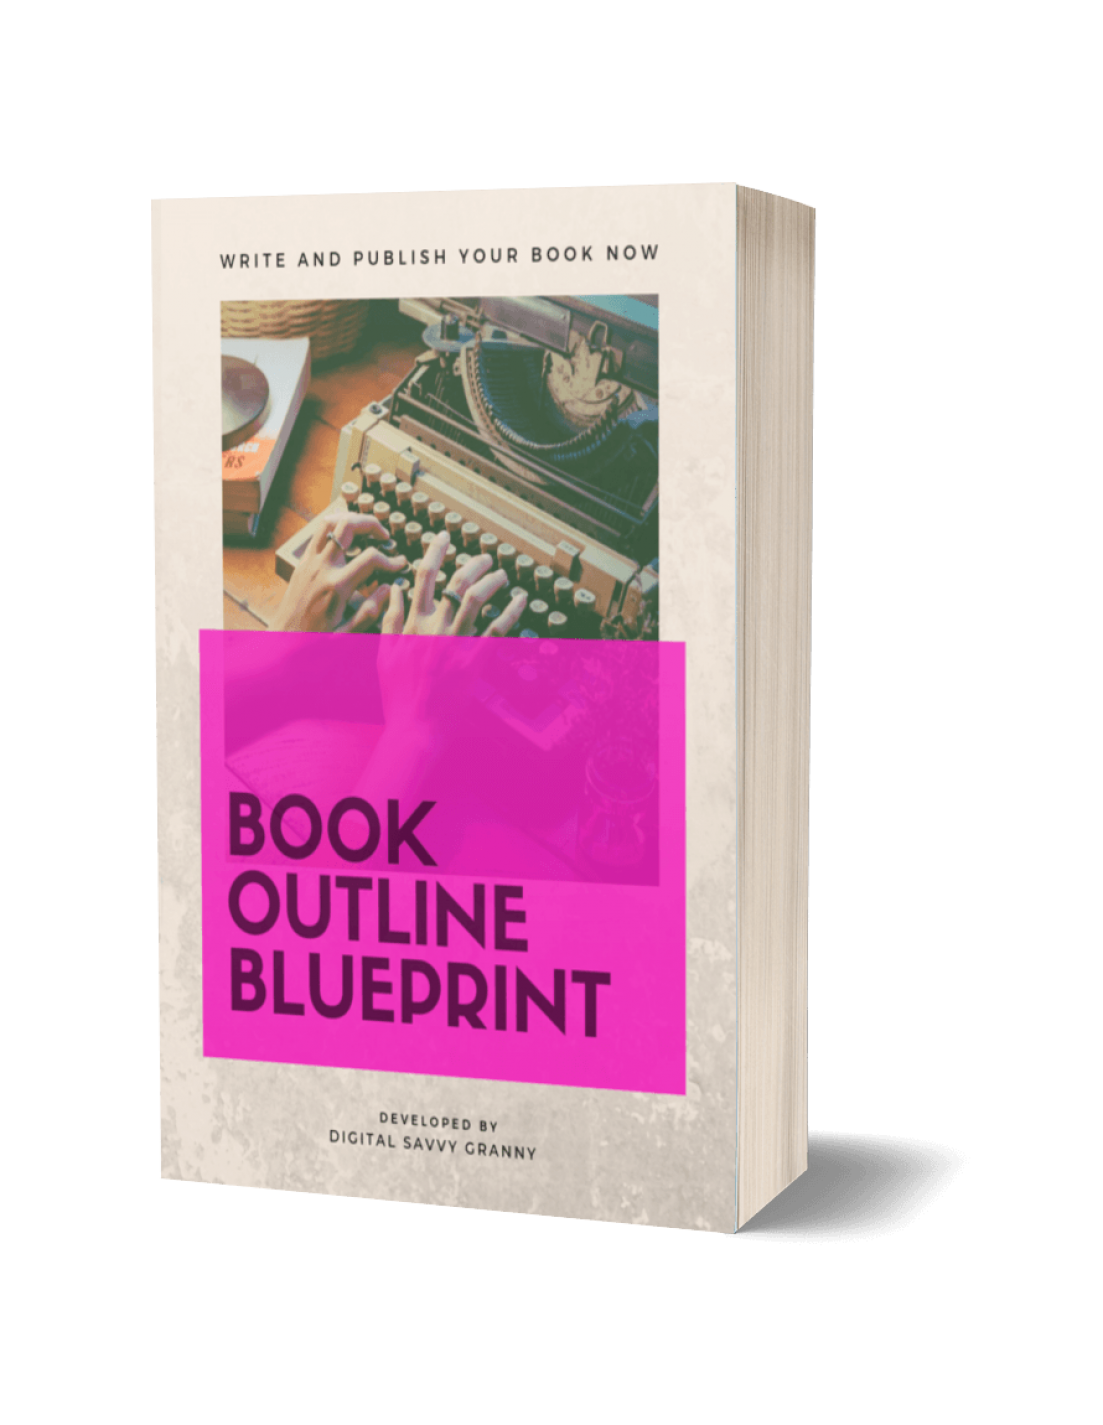 Cover Image for the Book Outline Blueprint